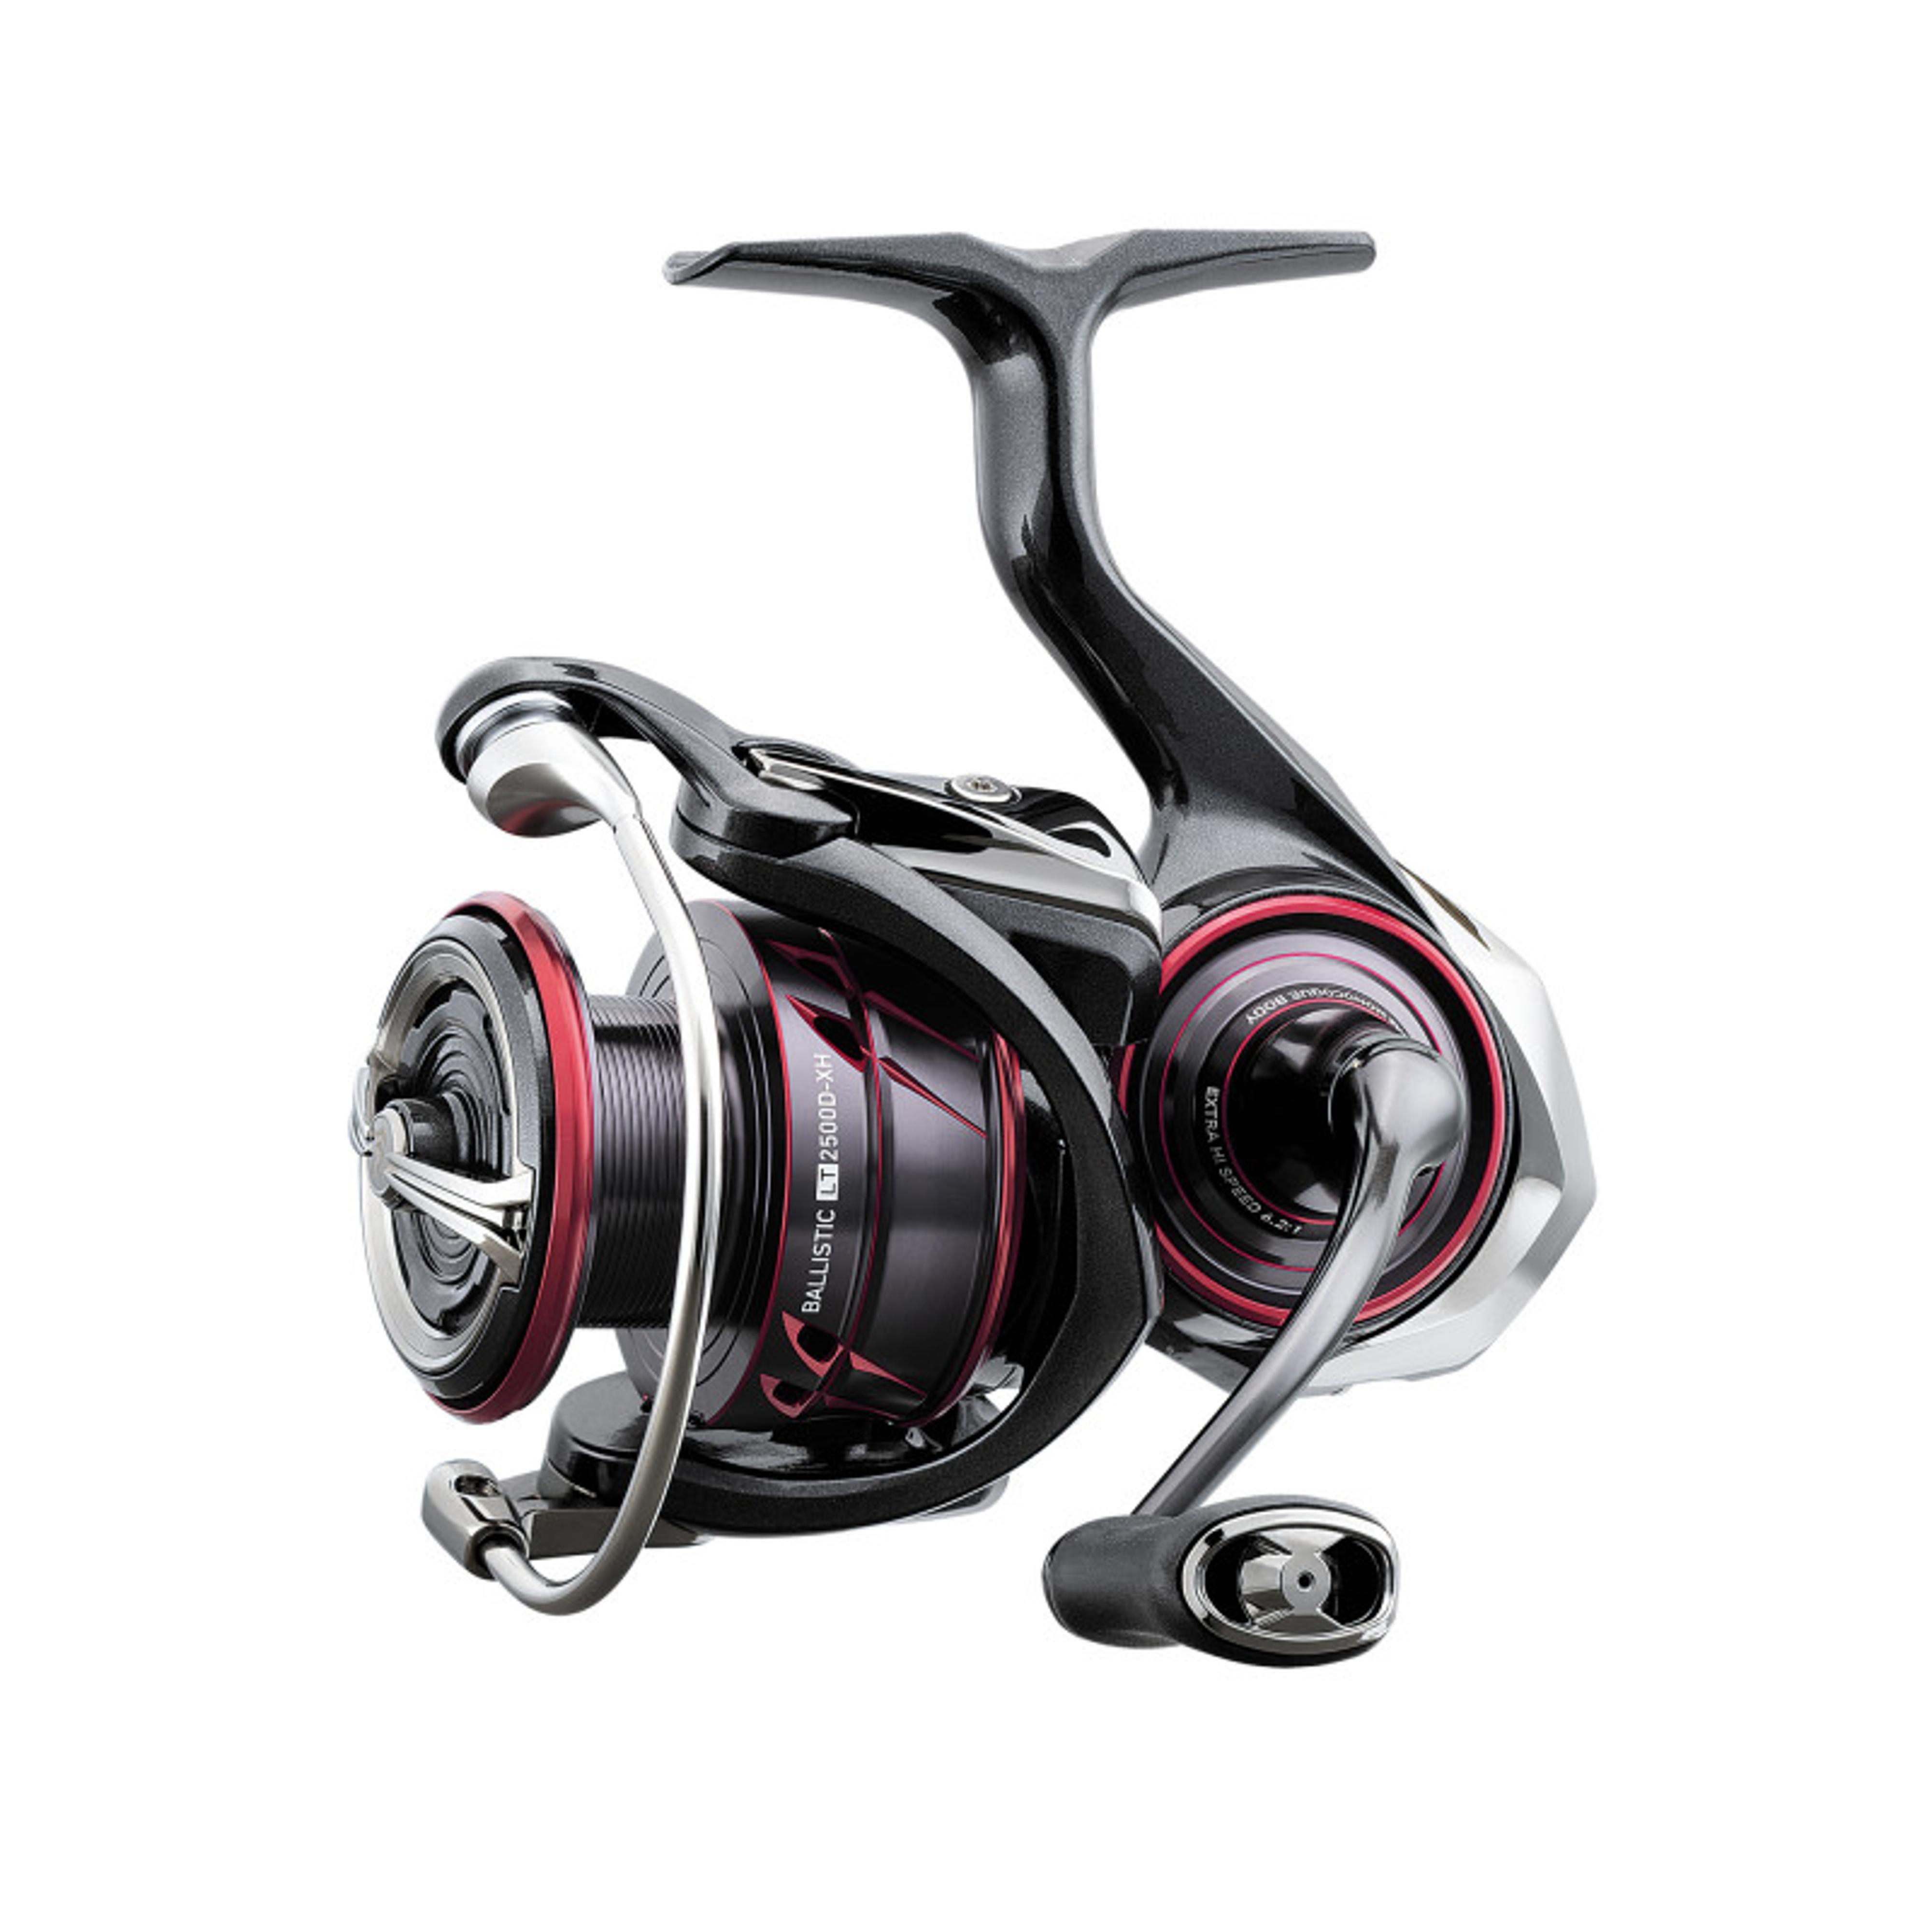 RD0145 Custom X-3000 Side Plate Details about   SHIMANO SPINNING REEL PART 